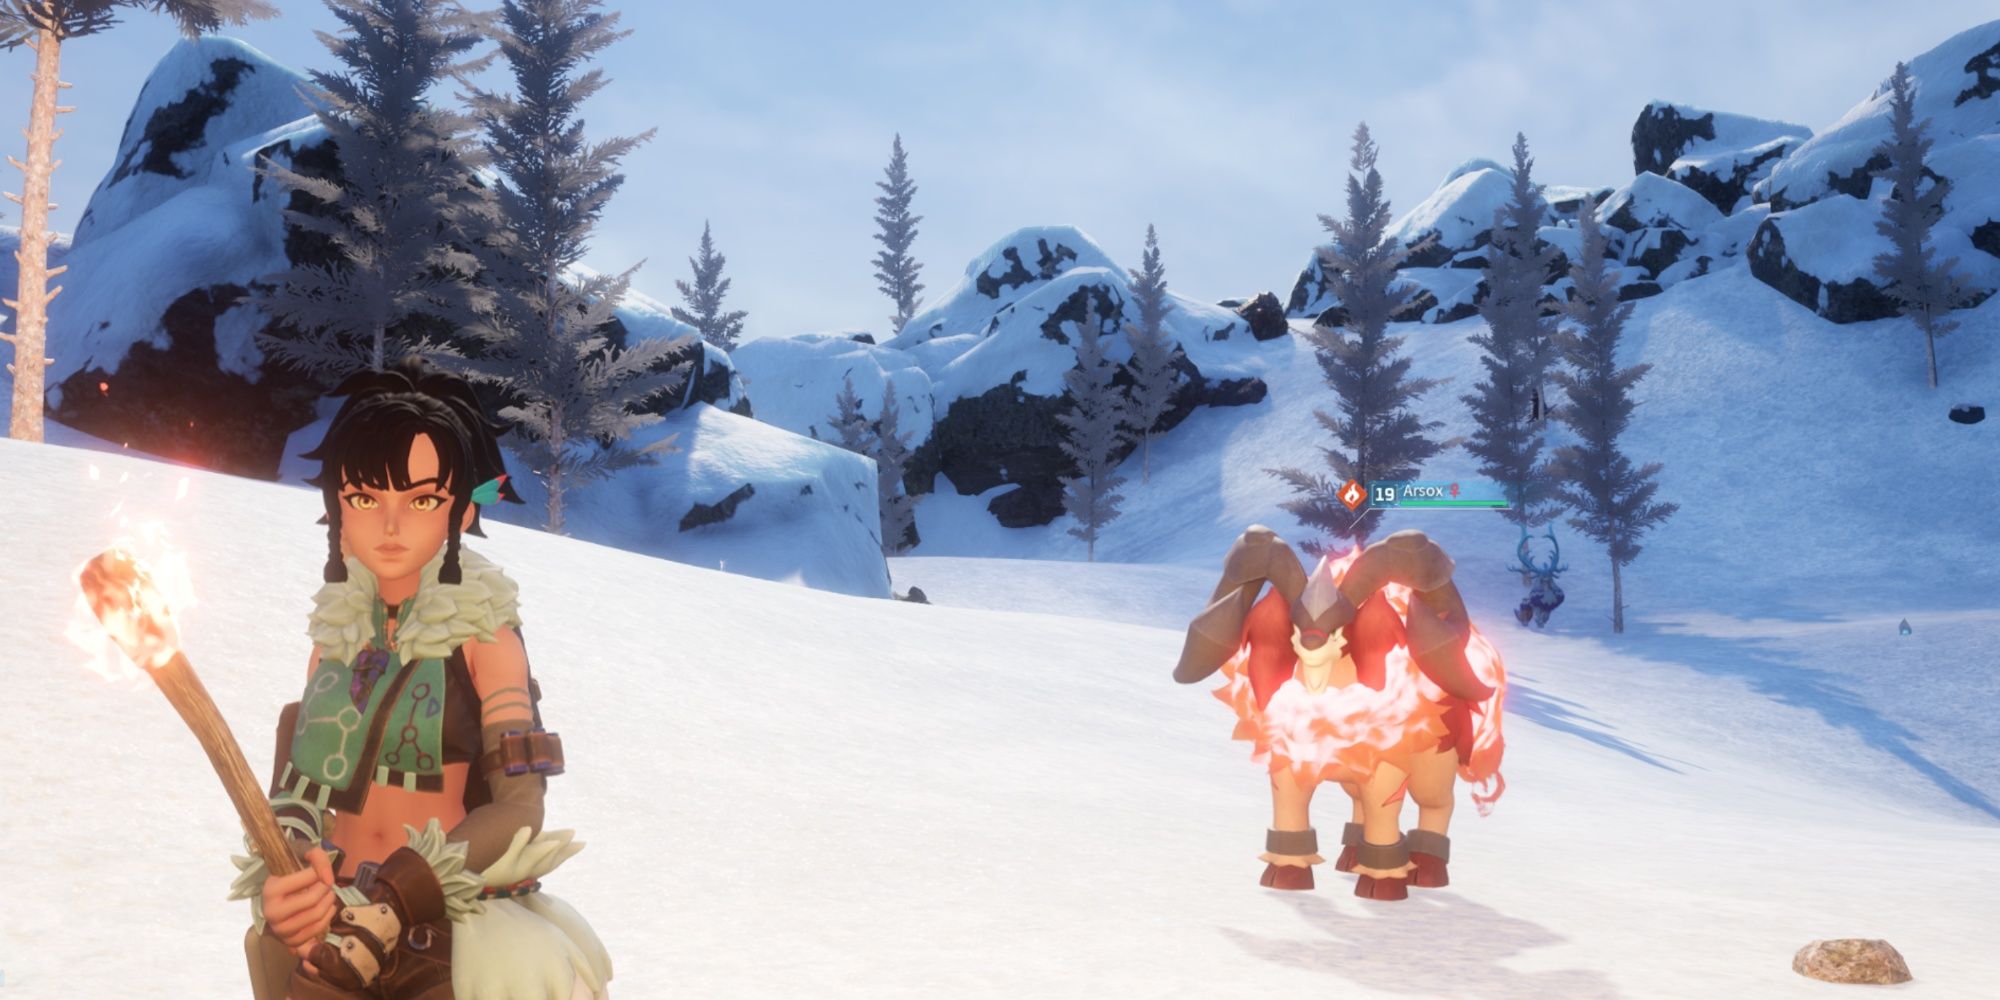 Palworld: the player character wearing Cold Resistant Pelt Armor and standing next to Arsox in the Tundra